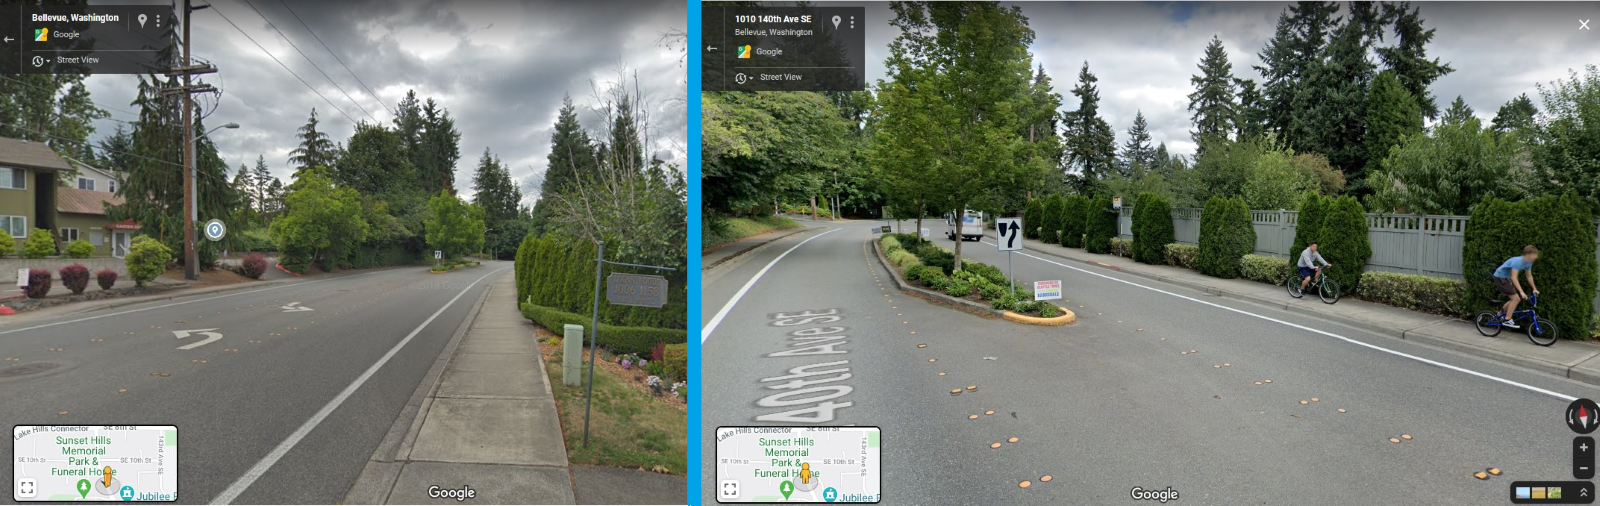 Left: Looking north on 145th Pl towards the study point. (Google Streetview) Right: A closer look of the median, curve, and bicycle facilities on both sides of the street. For the majority of people who do not feel comfortable cycling next to motor vehicles unprotected, the sidewalk is currently the only safe option. (Google StreetView)